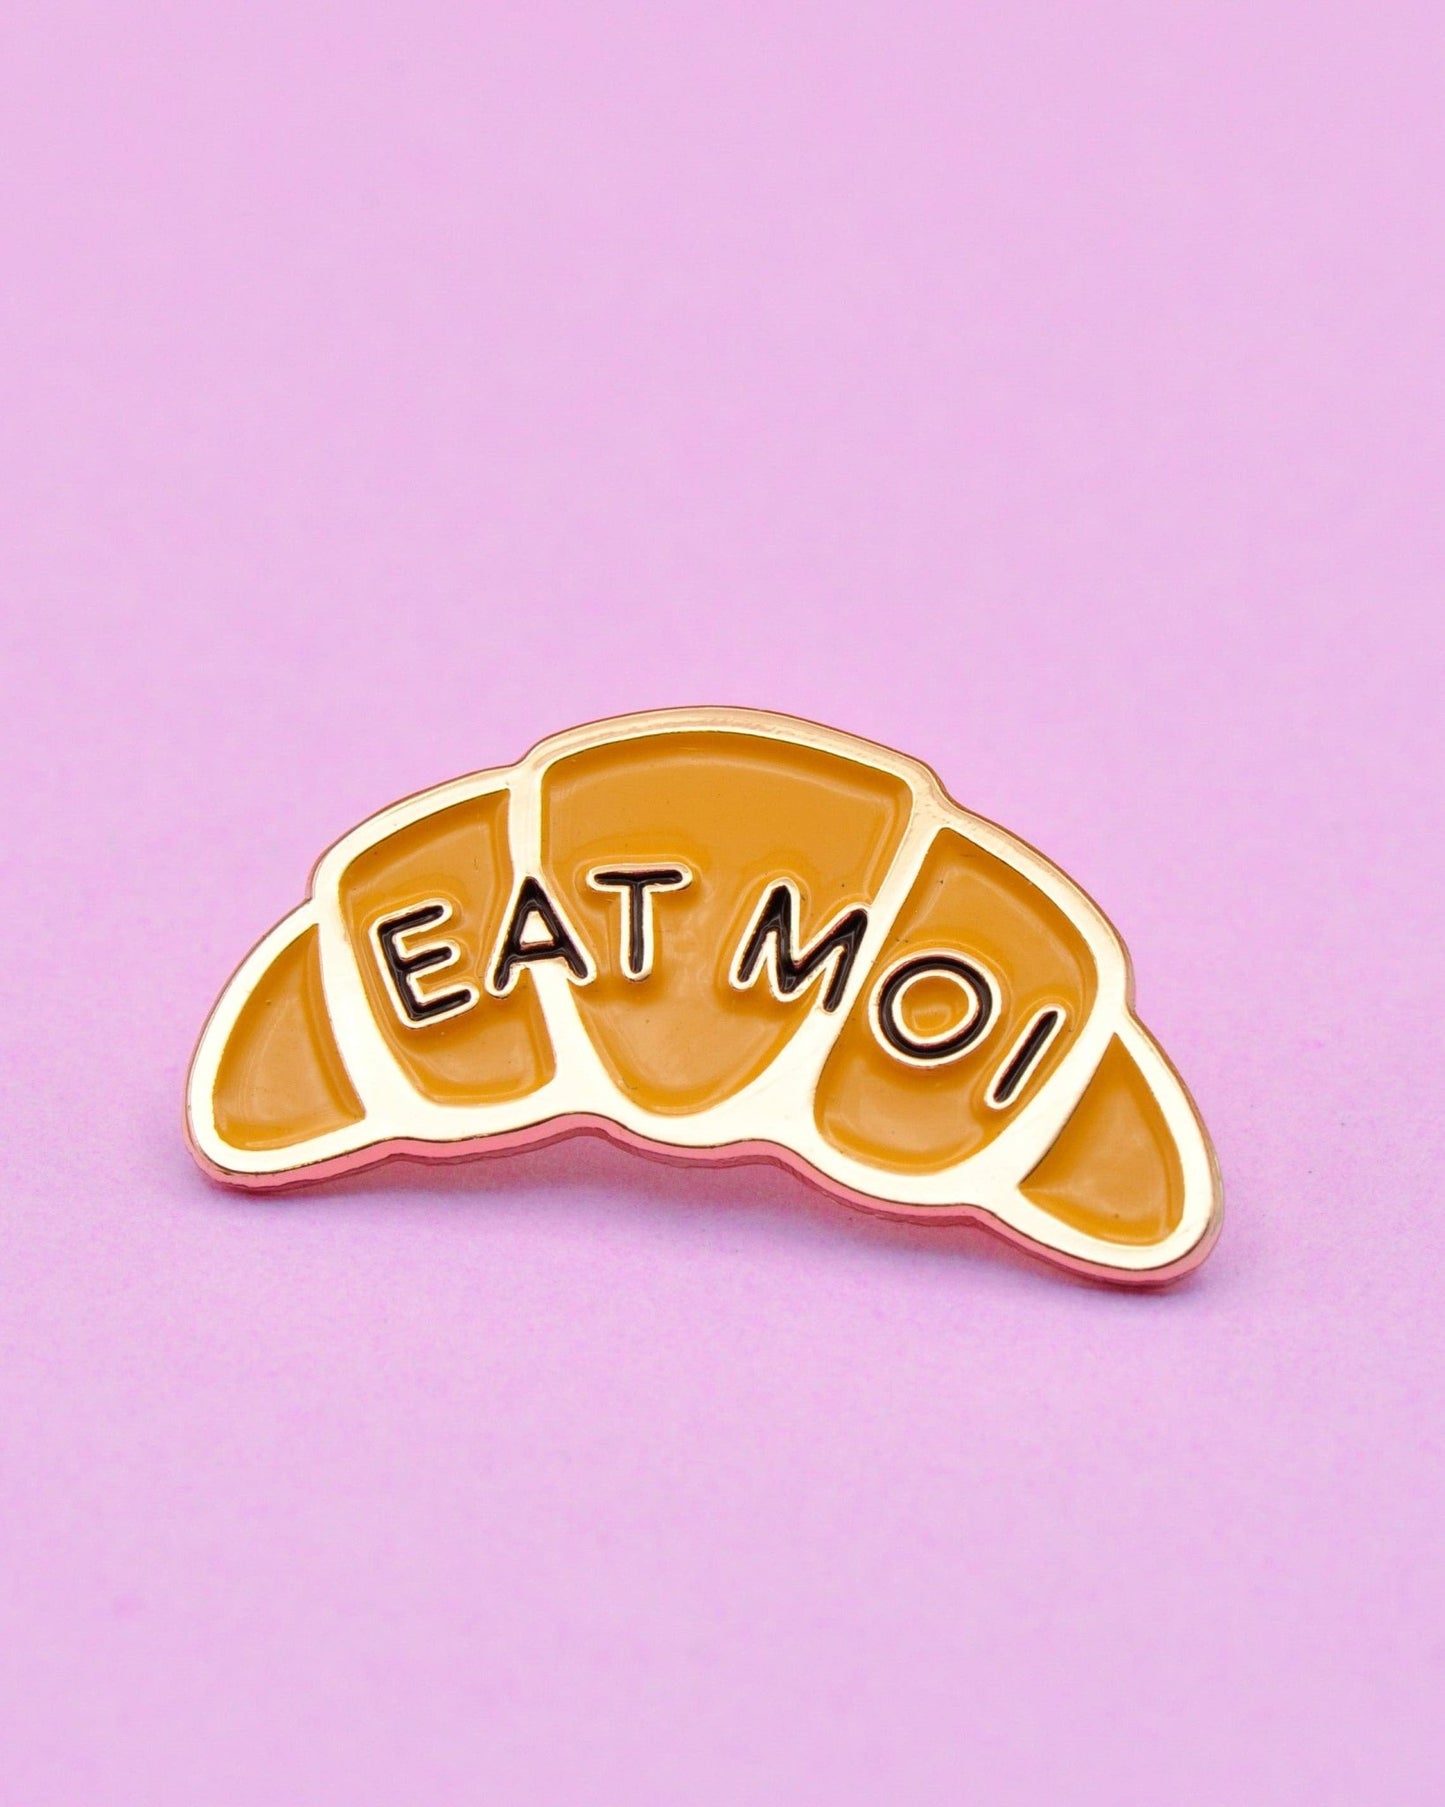 "Eat Moi" Croissant Pin - And Here We Are - Burnt Honey Bakery